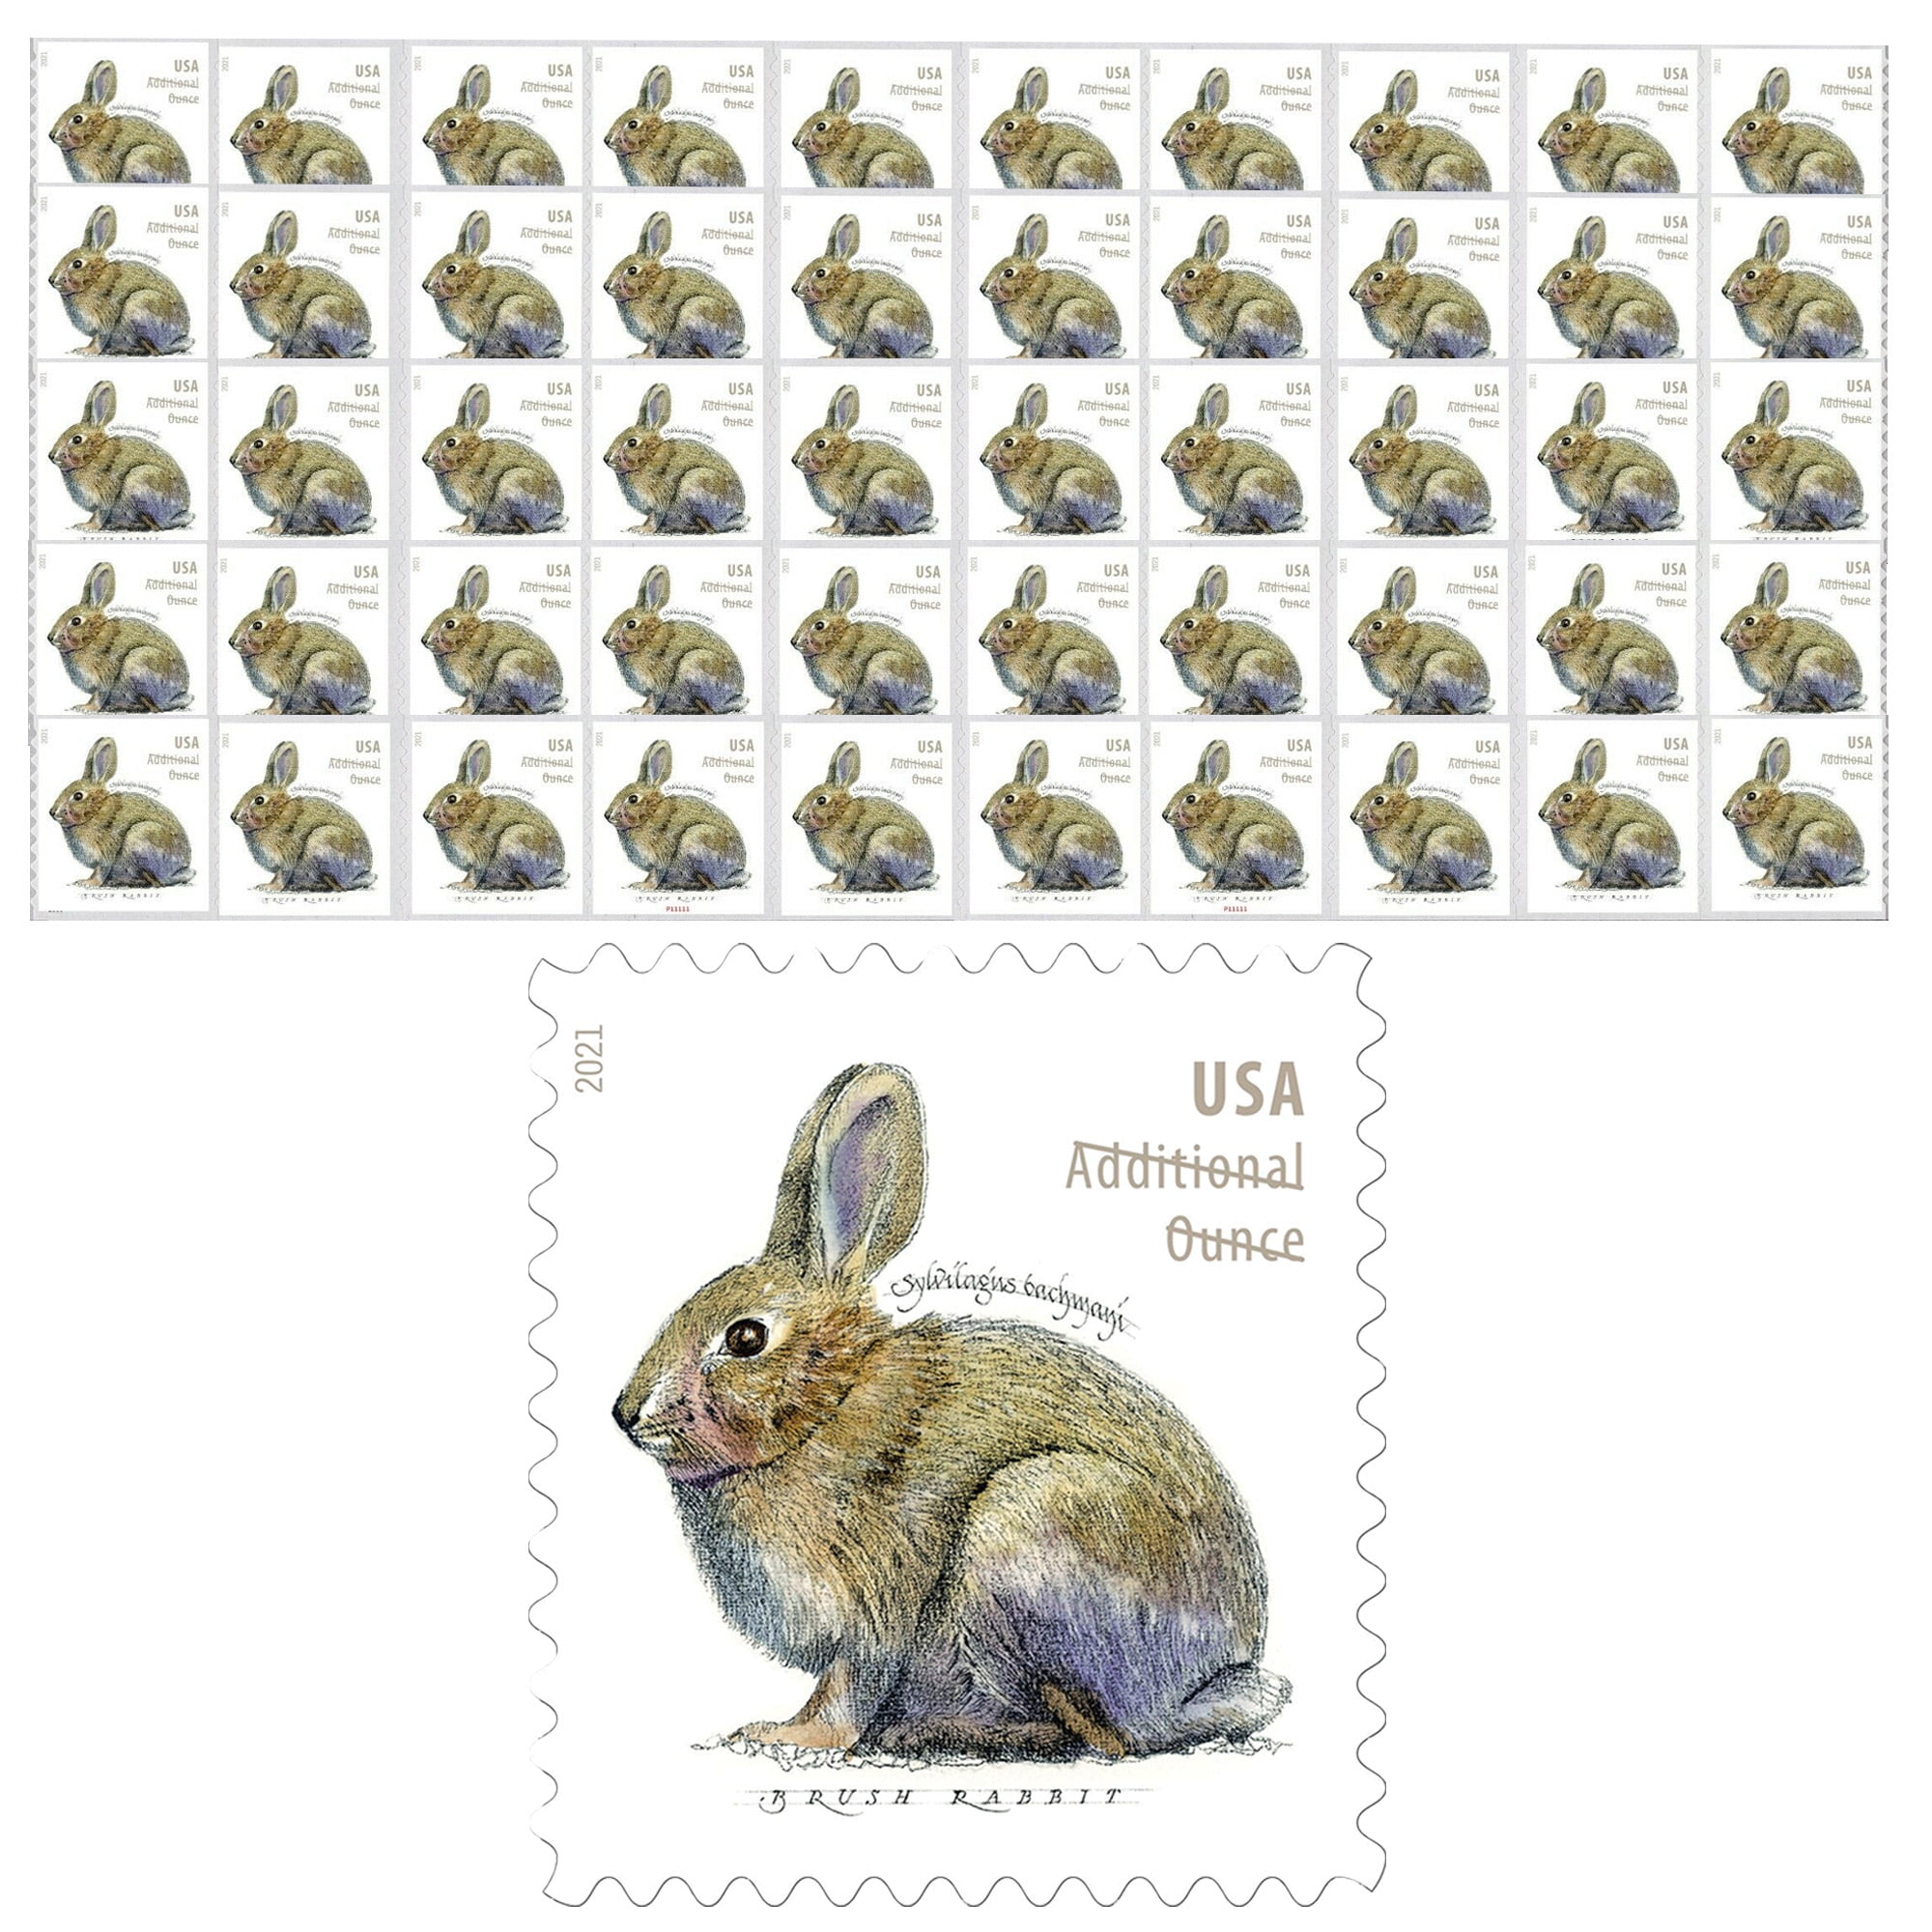 Brush Rabbit Stamps 20c Self-adhesive Stamps  Pristine as Issued by the Post Office Valid for Postage 10 10 Pack Ten